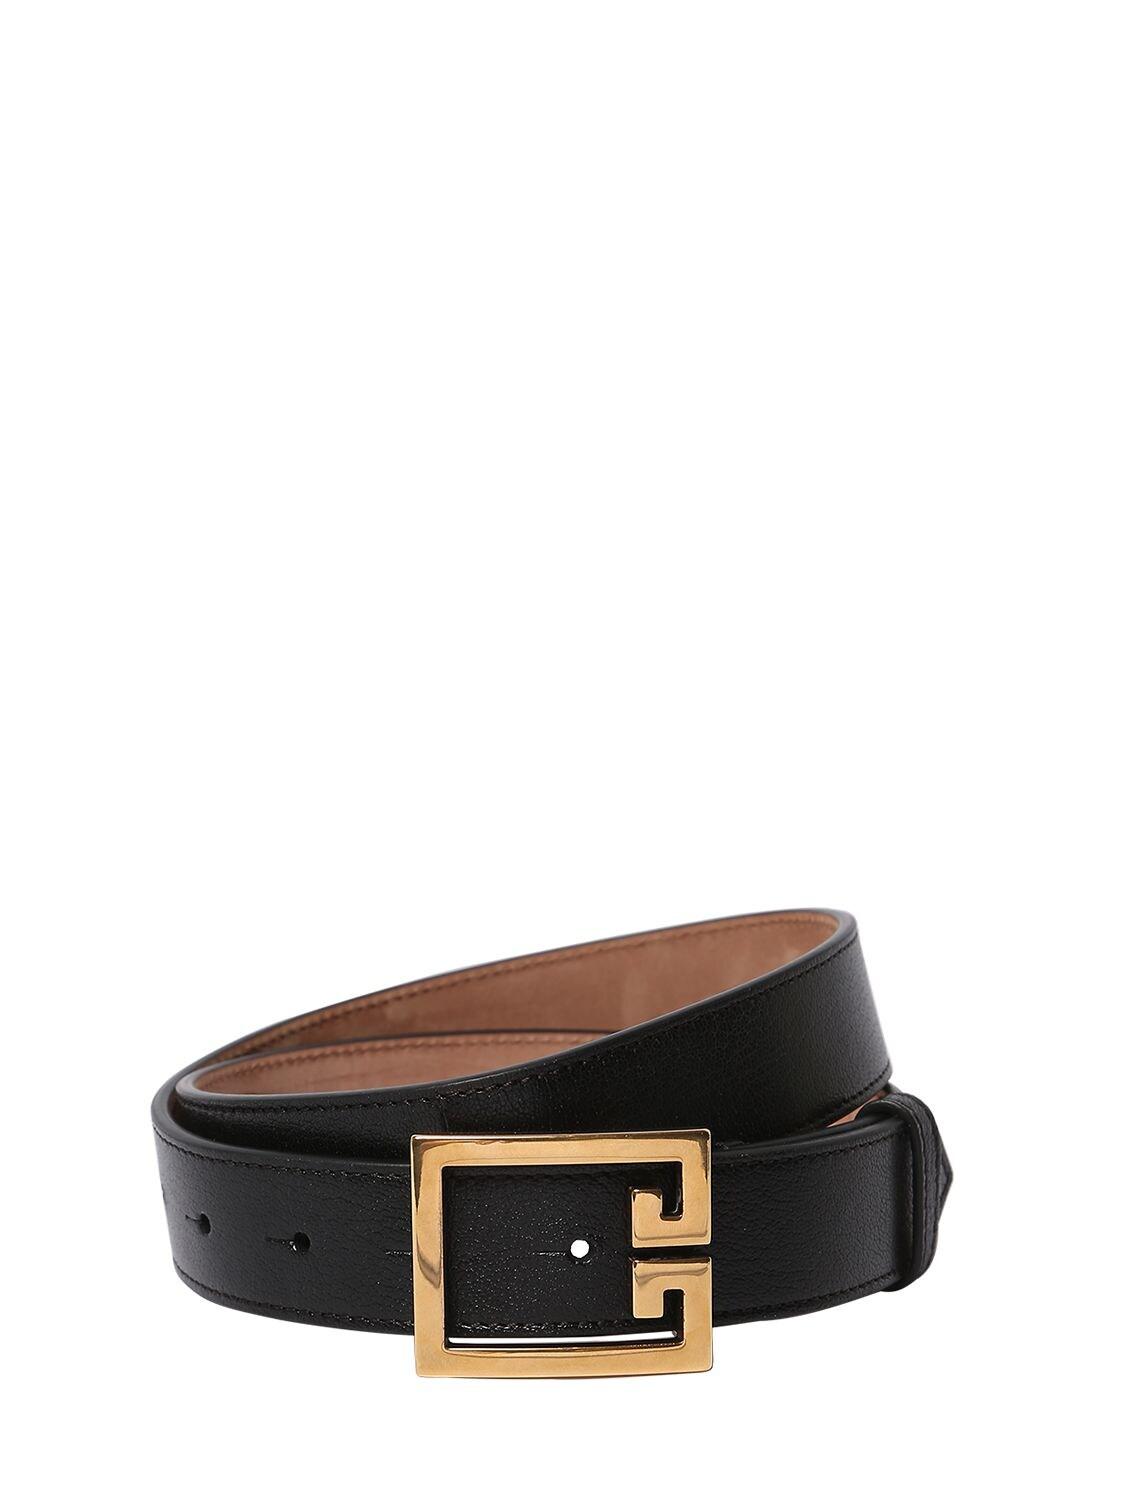 Givenchy 30mm Logo Leather Belt in Black - Lyst